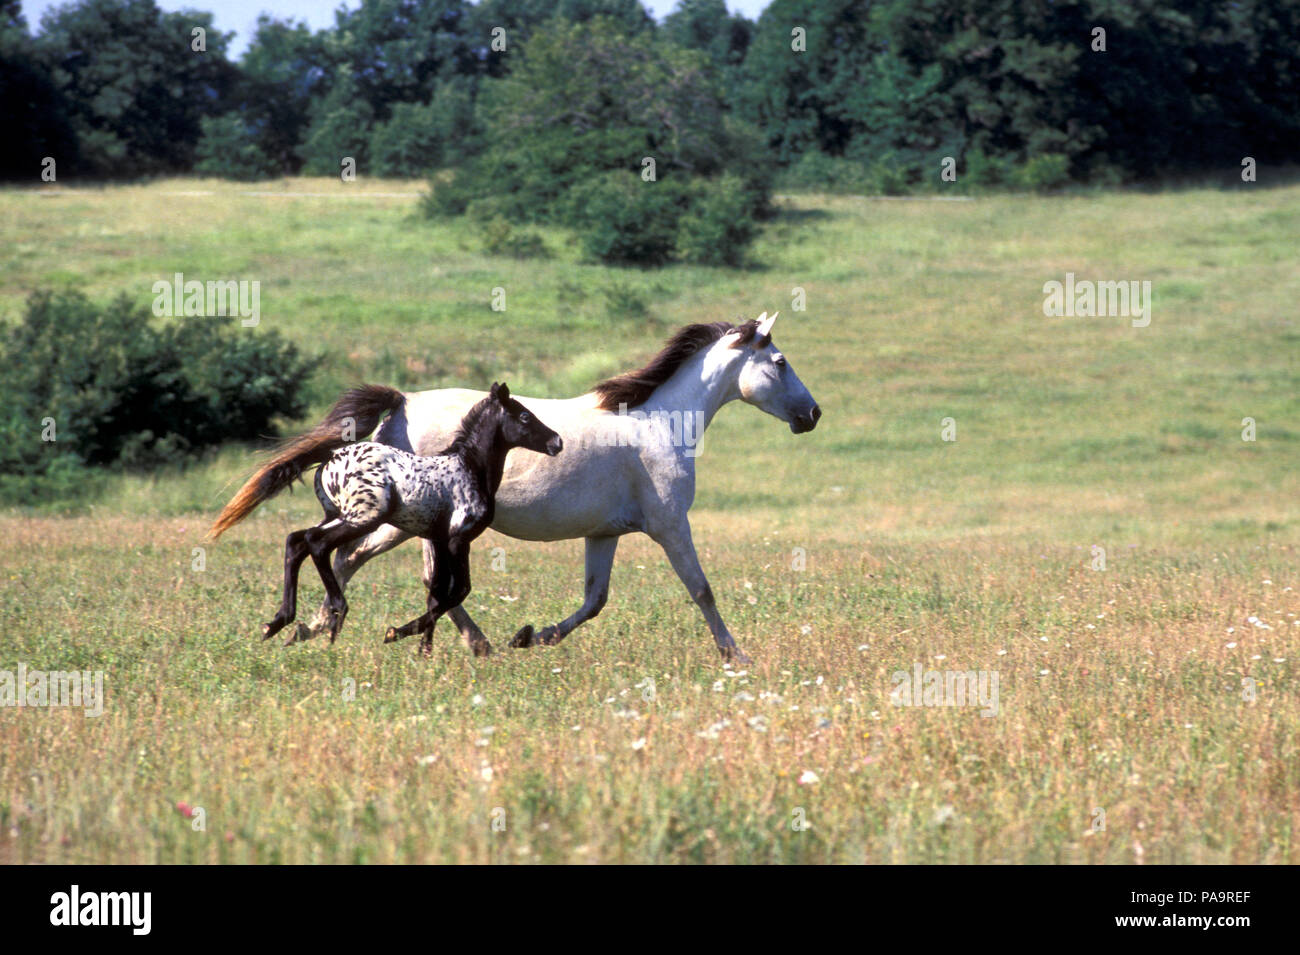 Appaloosa - Mare and foal - Running (Equus caballus) Jument et poulain - Course Stock Photo